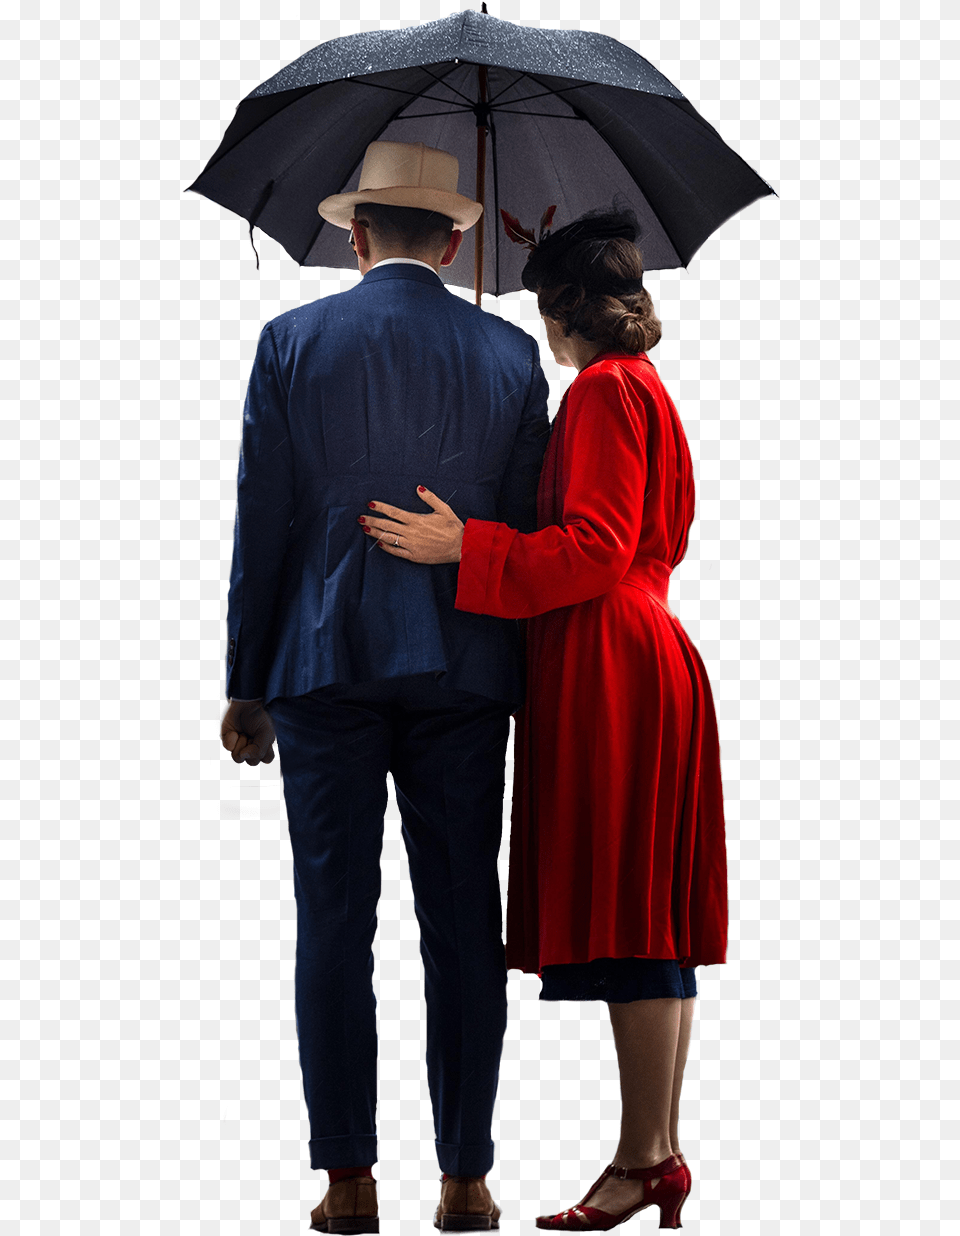 Personcouple Standing Under An Umbrella Download Human With Umbrella, Clothing, Coat, Adult, Person Png